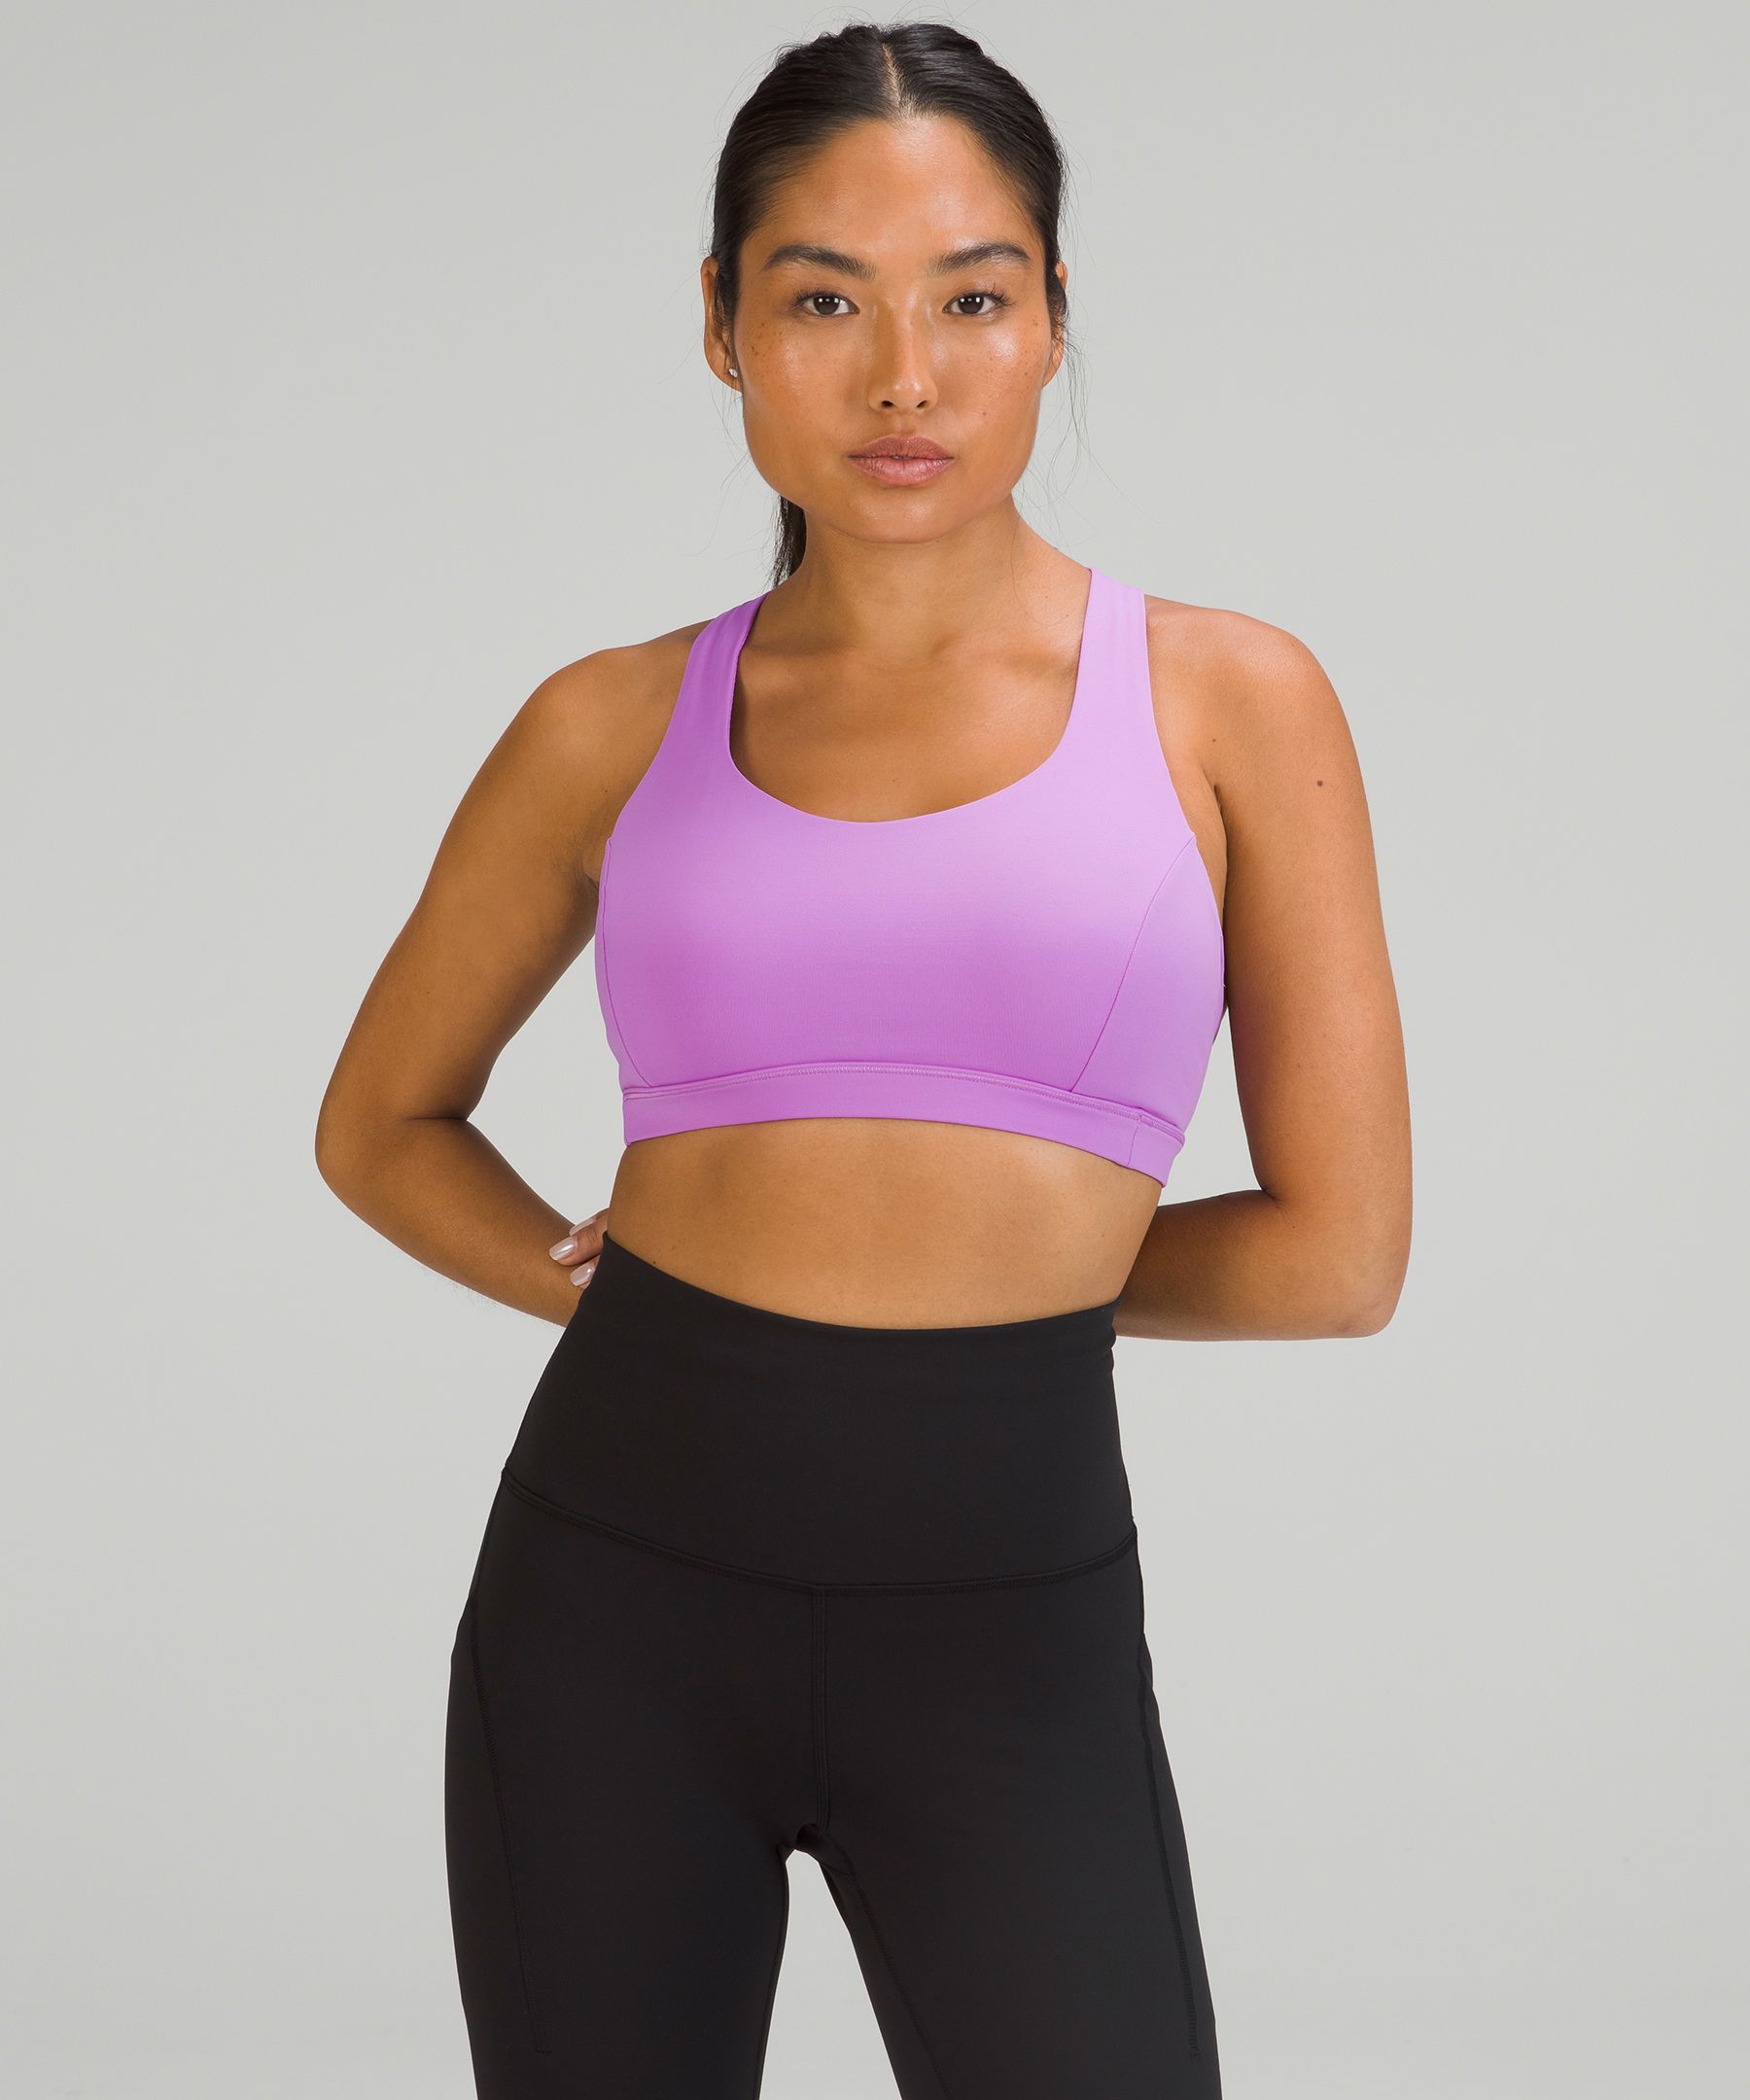 NEW Lululemon Free to Be Serene Bra Light Support C/D Cup Pink Mist Size 6